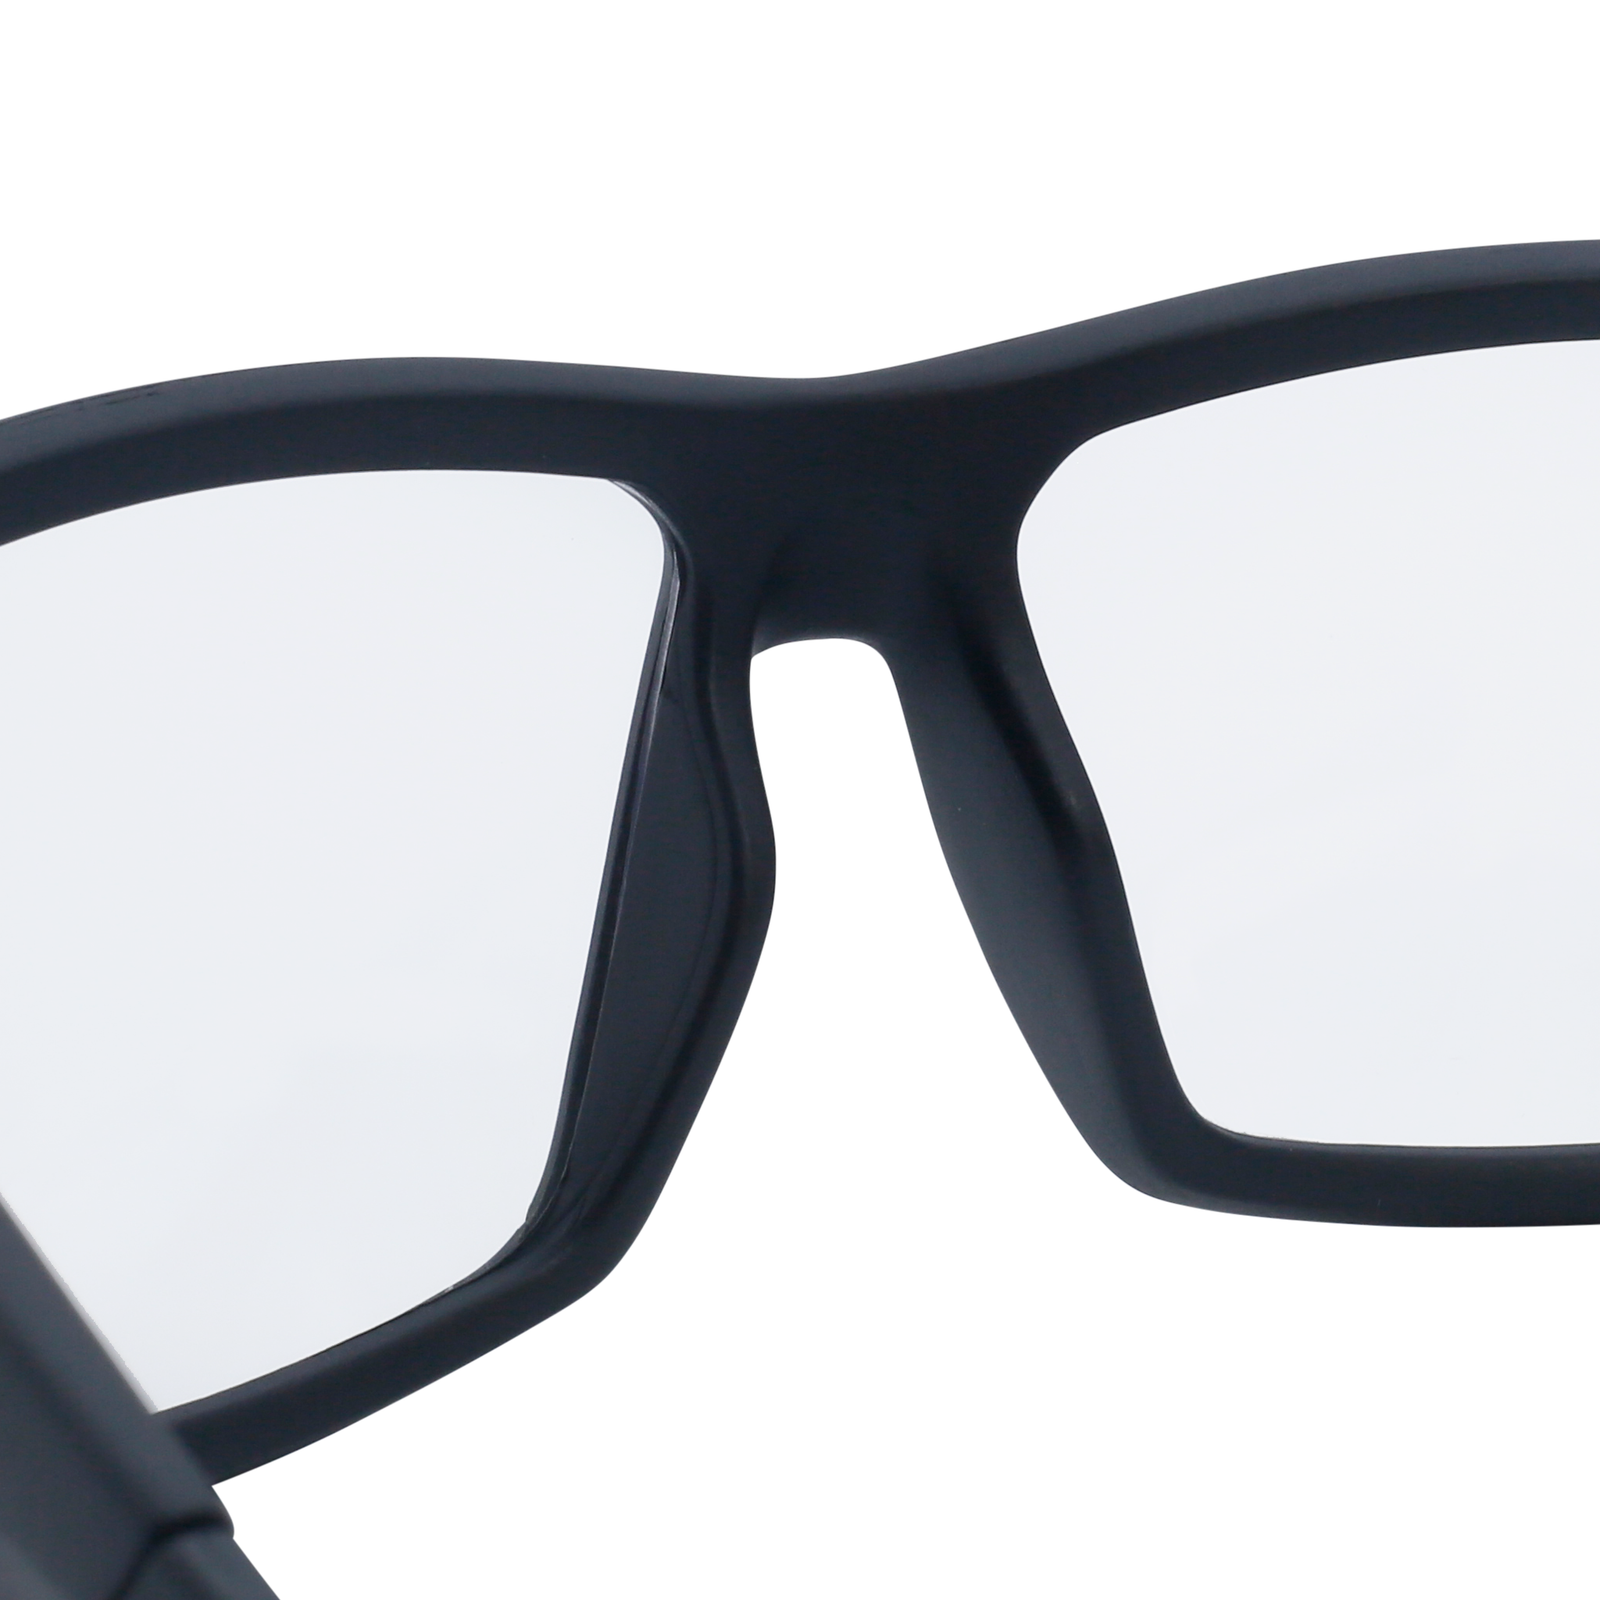 Close up image showing the nose bridge of the JORESTECH clear safety glasses